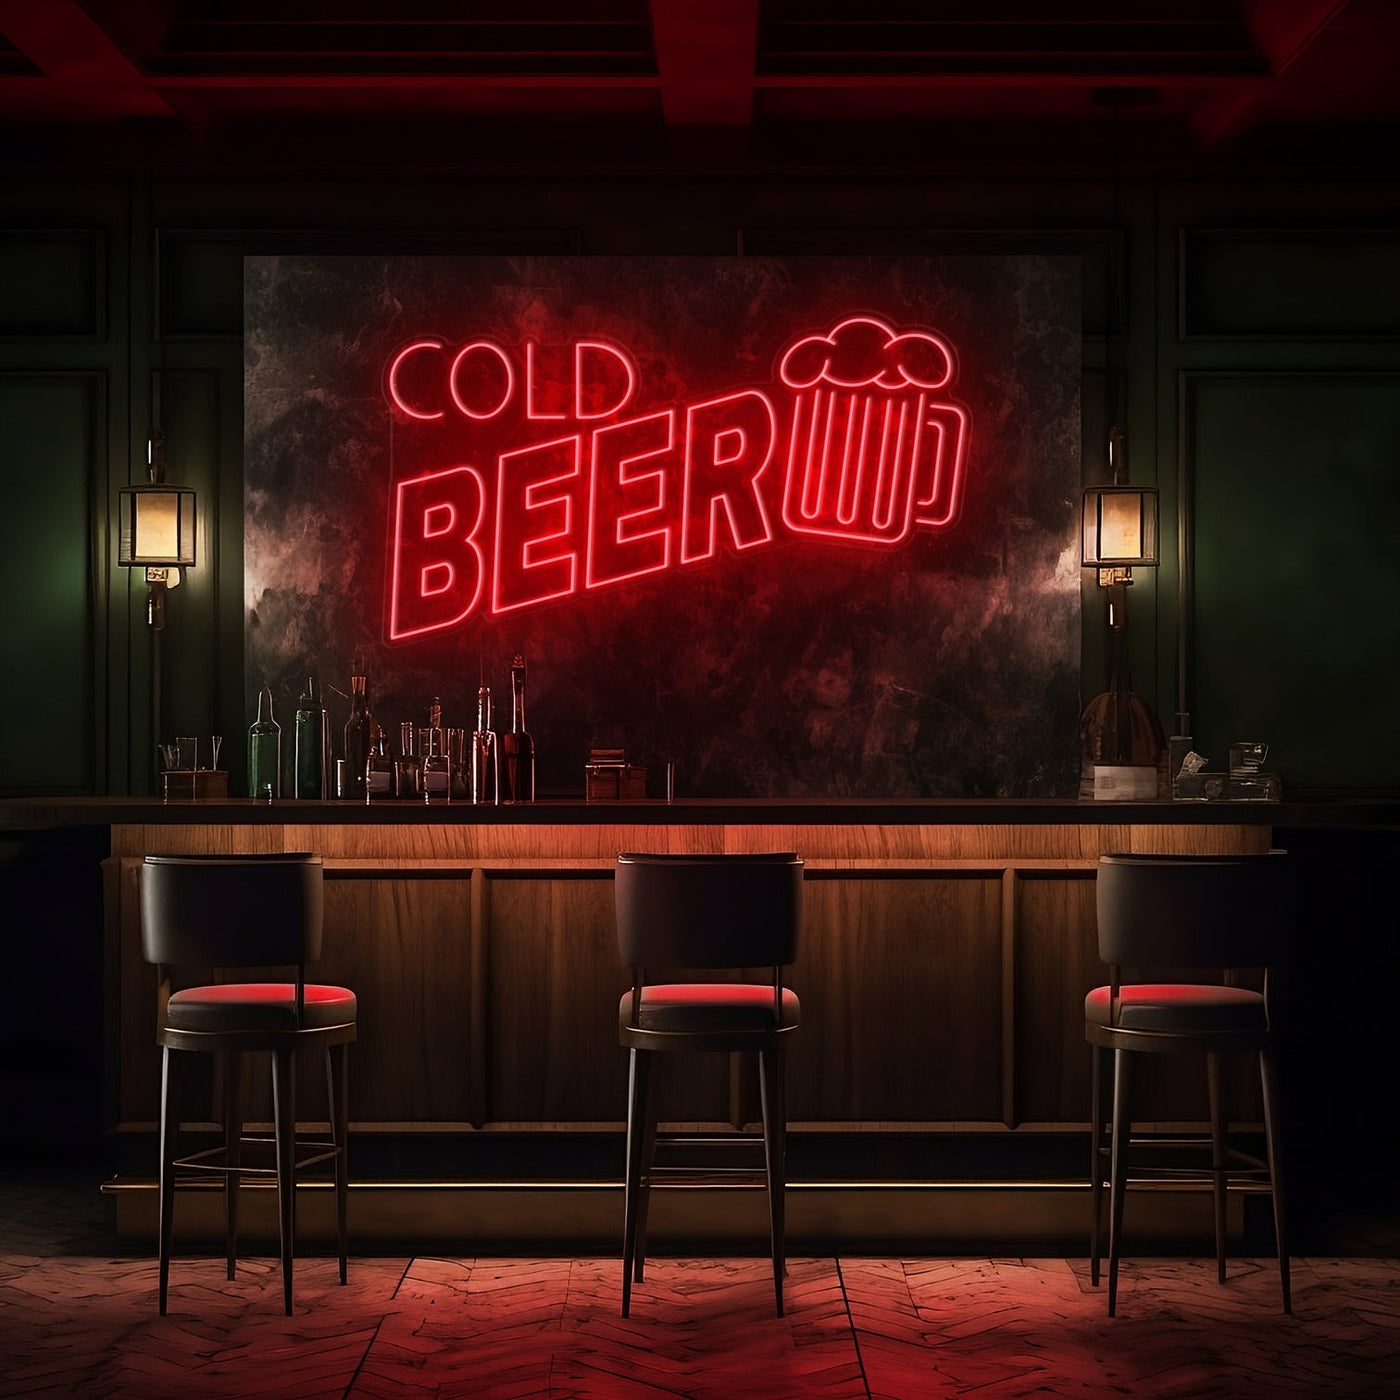 Cold Beer Bar LED Neon Sign - 30 InchGolden Yellow